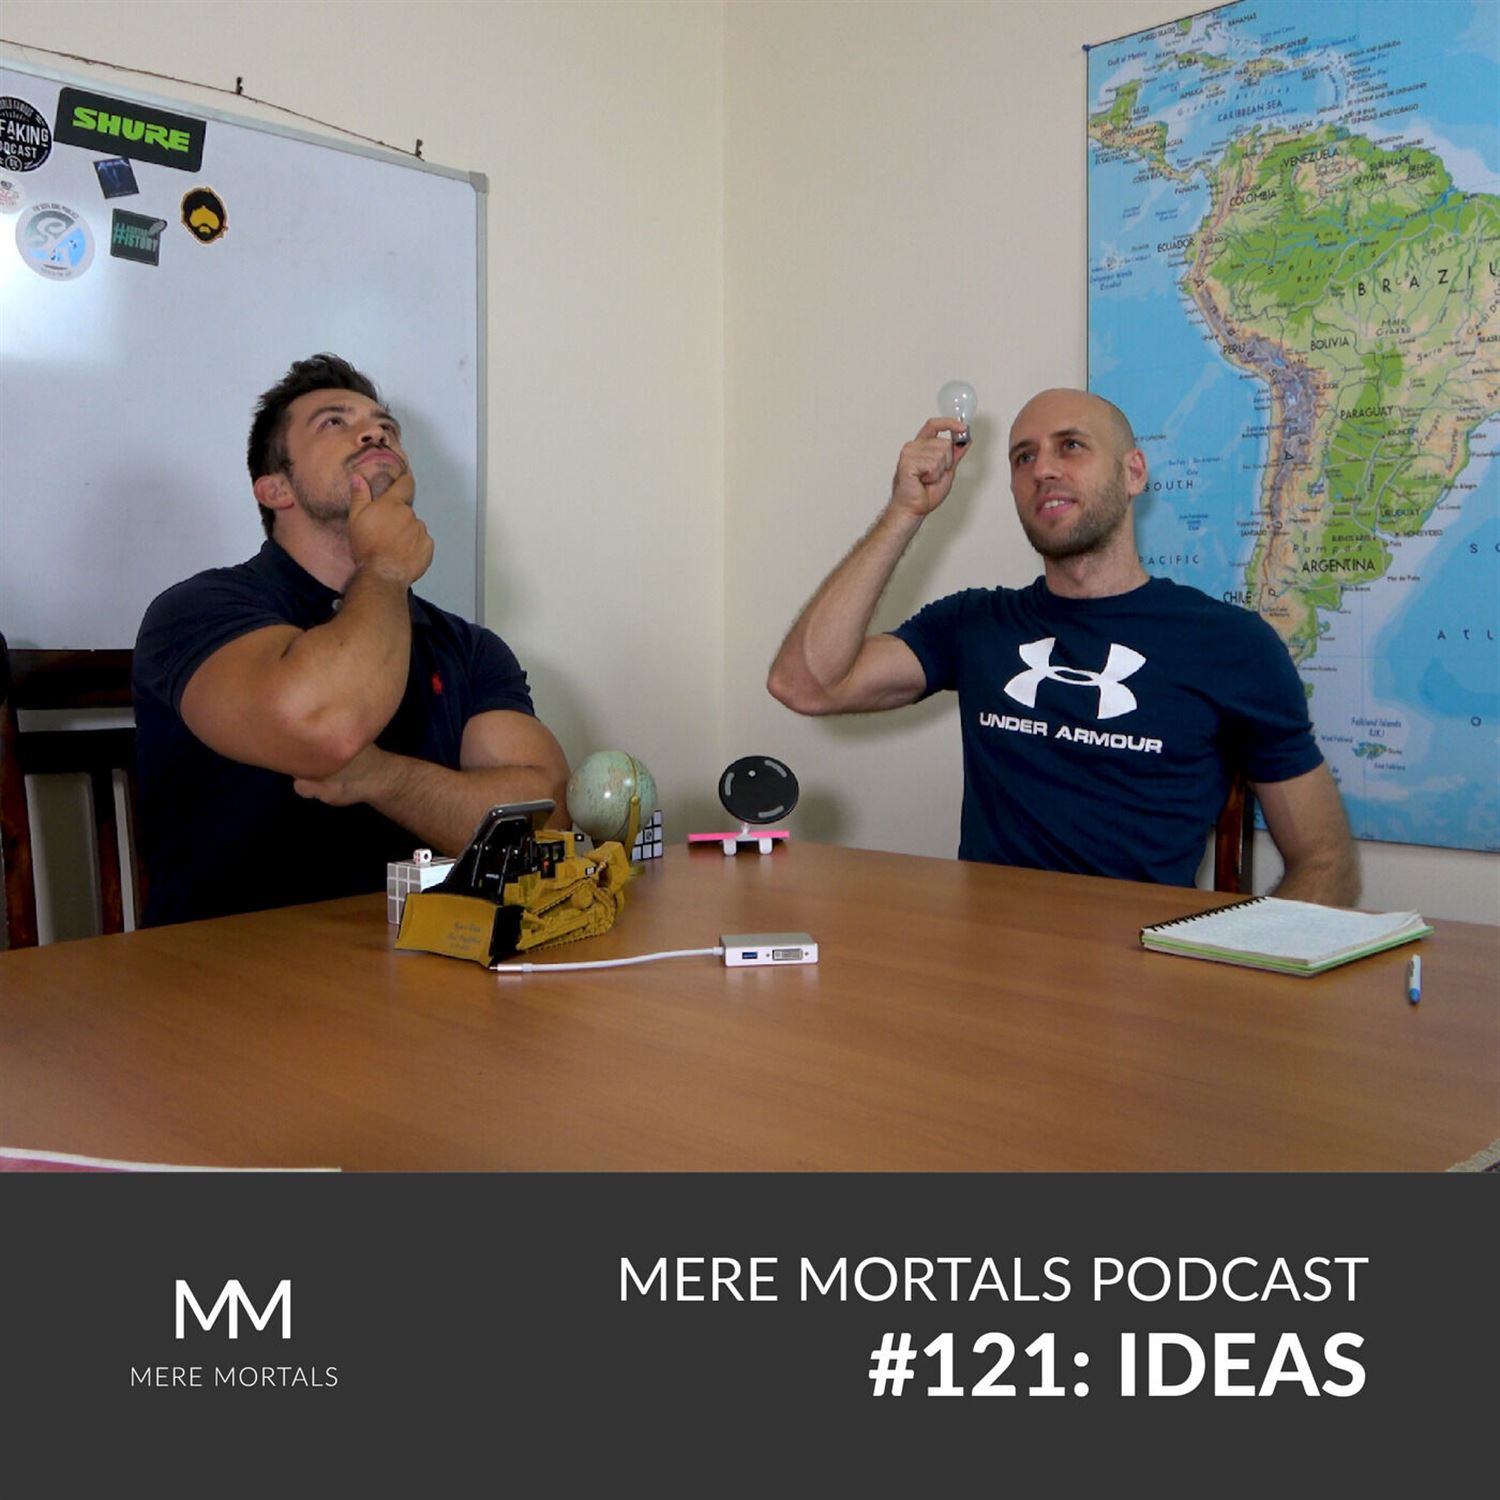 Are Ideas Inherently Good Or Bad? (Episode #121 - Ideas)